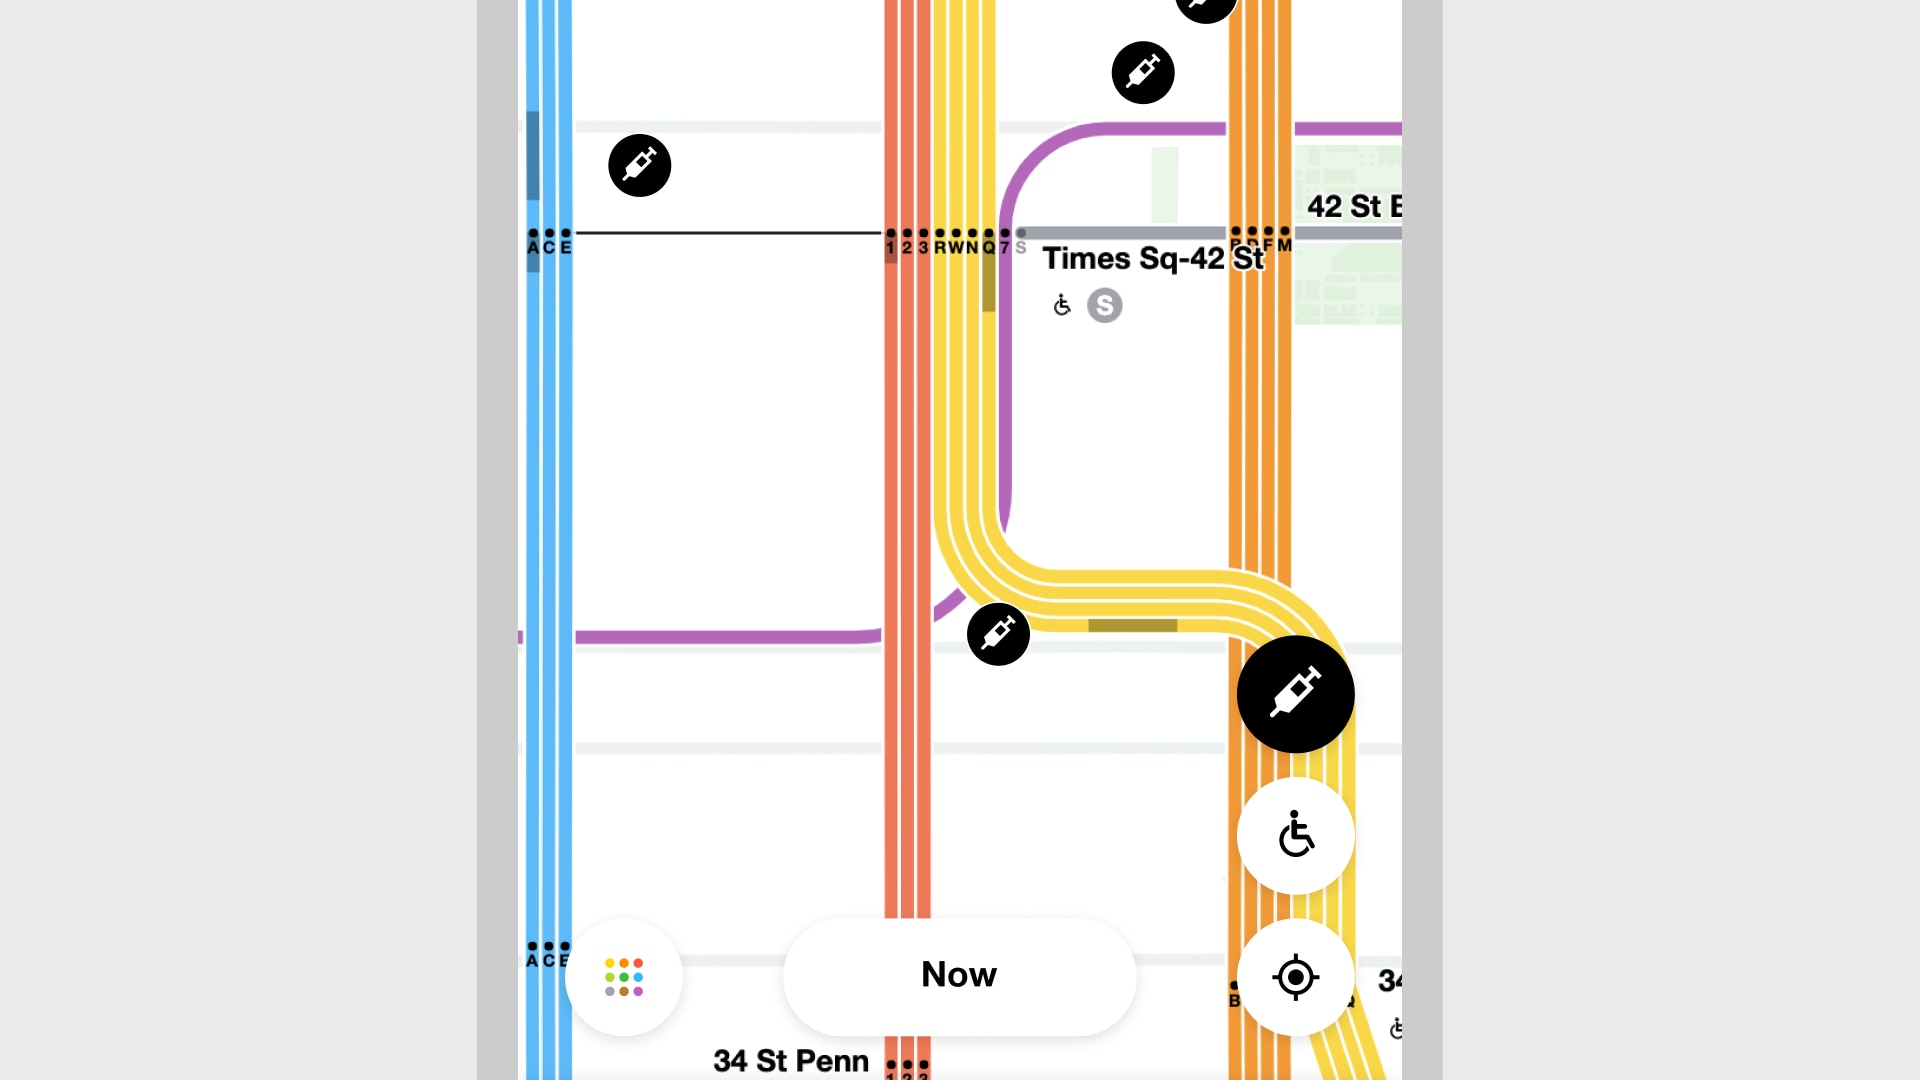 MTA’s Groundbreaking Live Subway Map Is a Winner at Fast Company’s 2021 Innovation by Design Awards